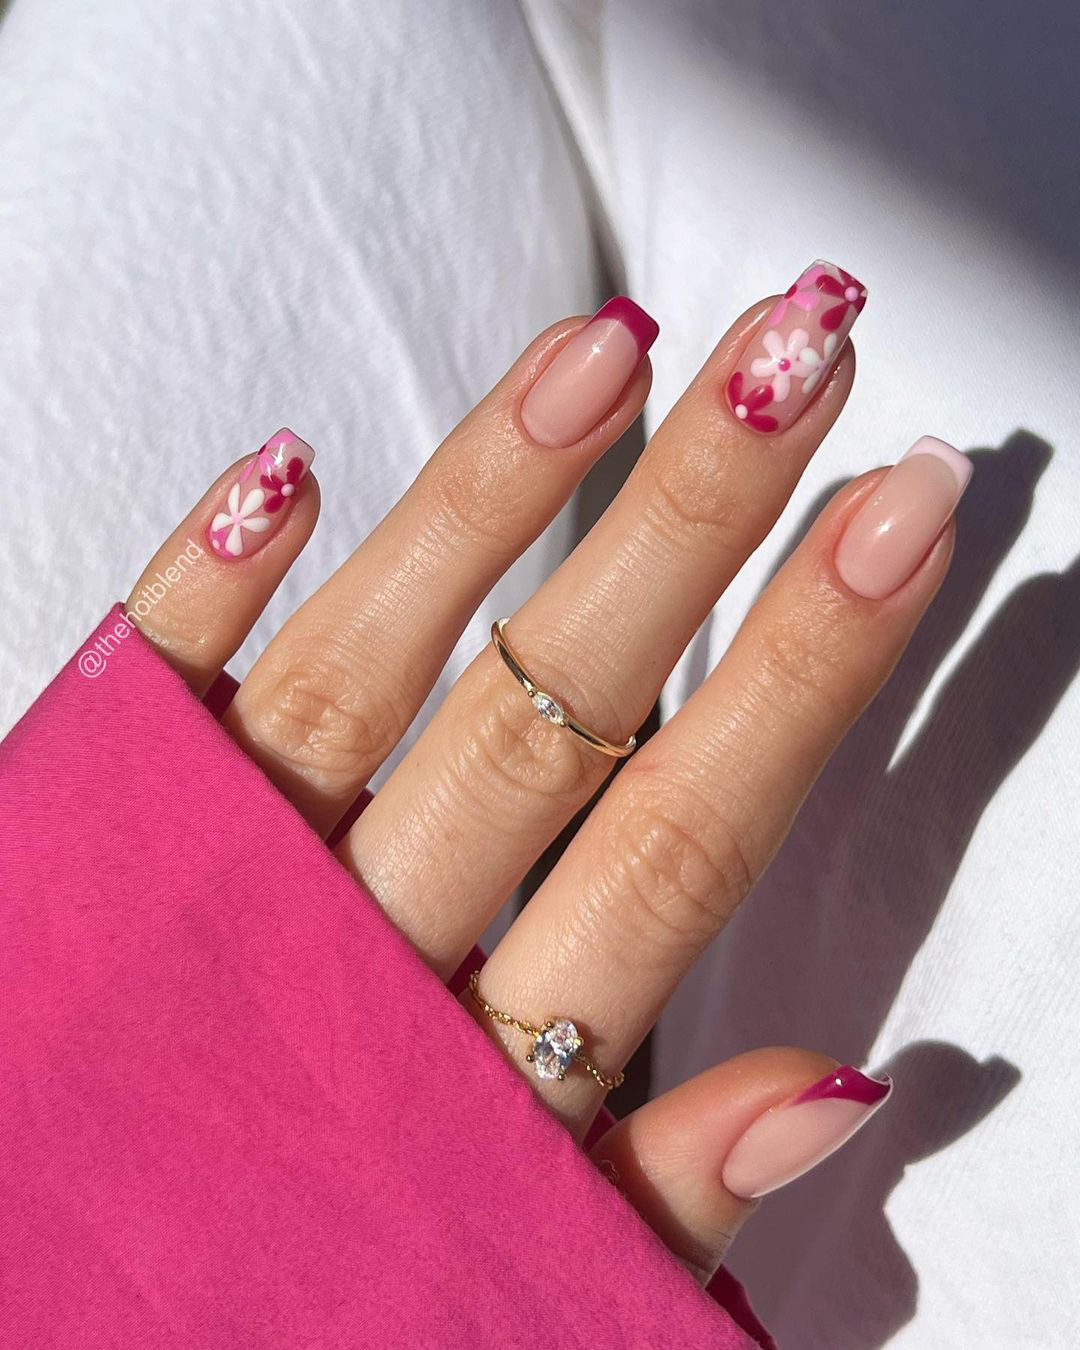 pink and white nails hot with flowers and french tips thehotblend